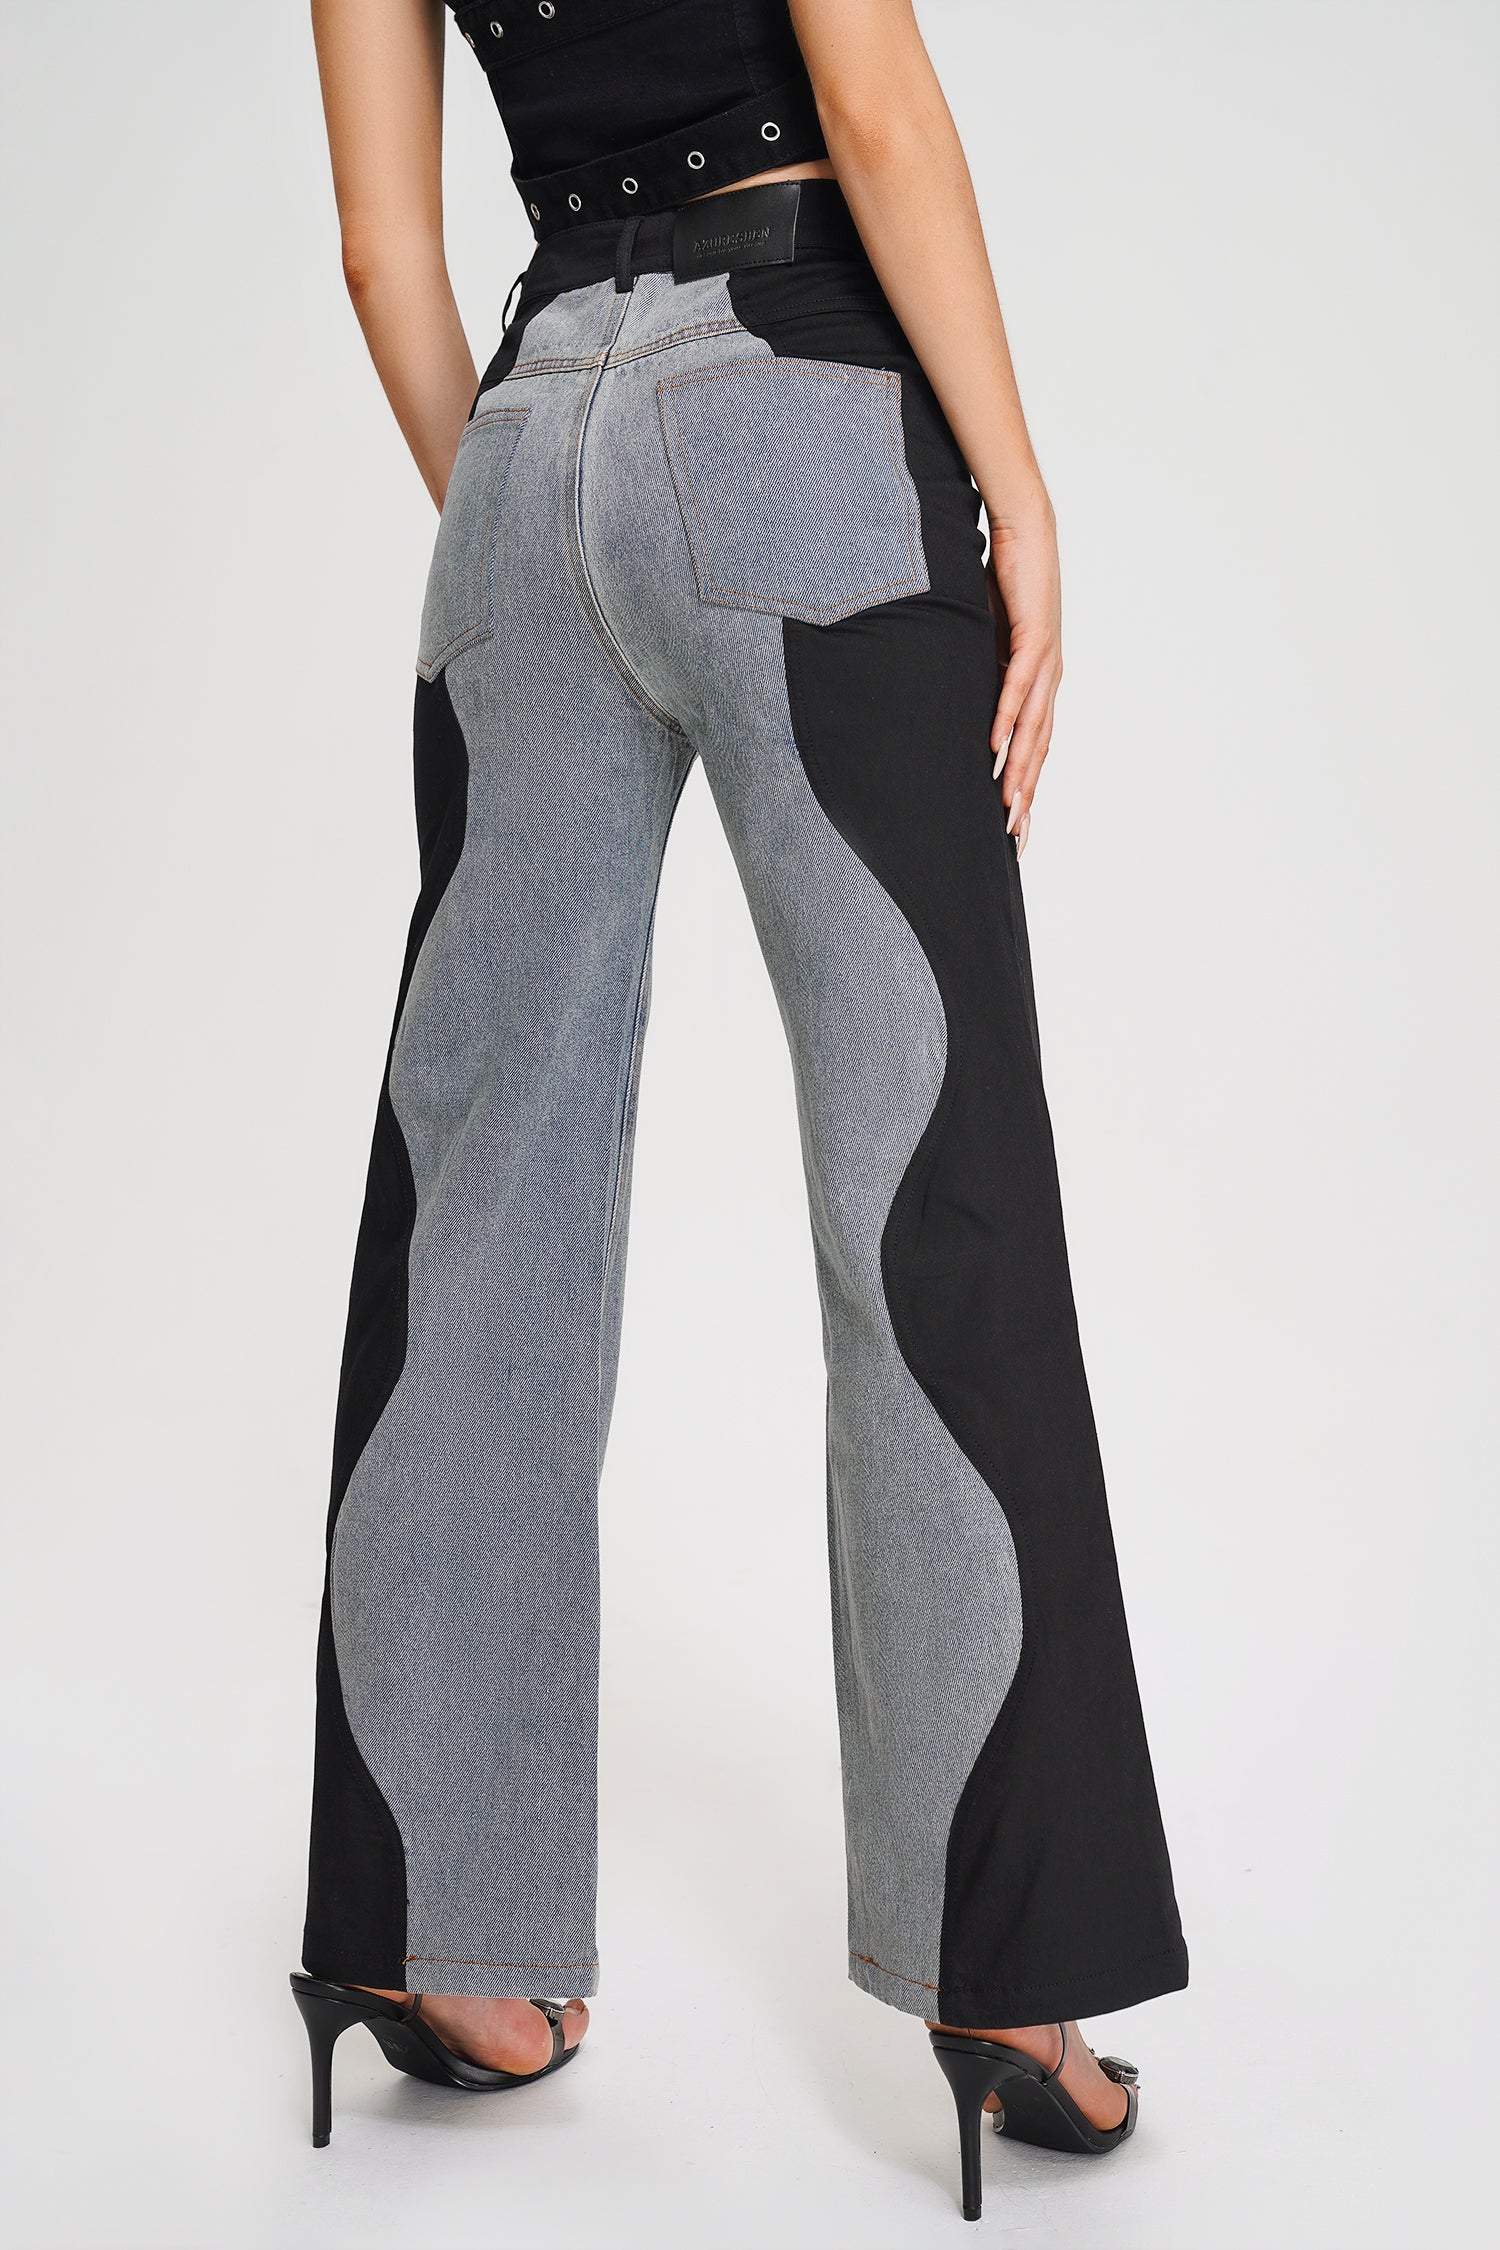 Maryline Wave Spliced Jeans